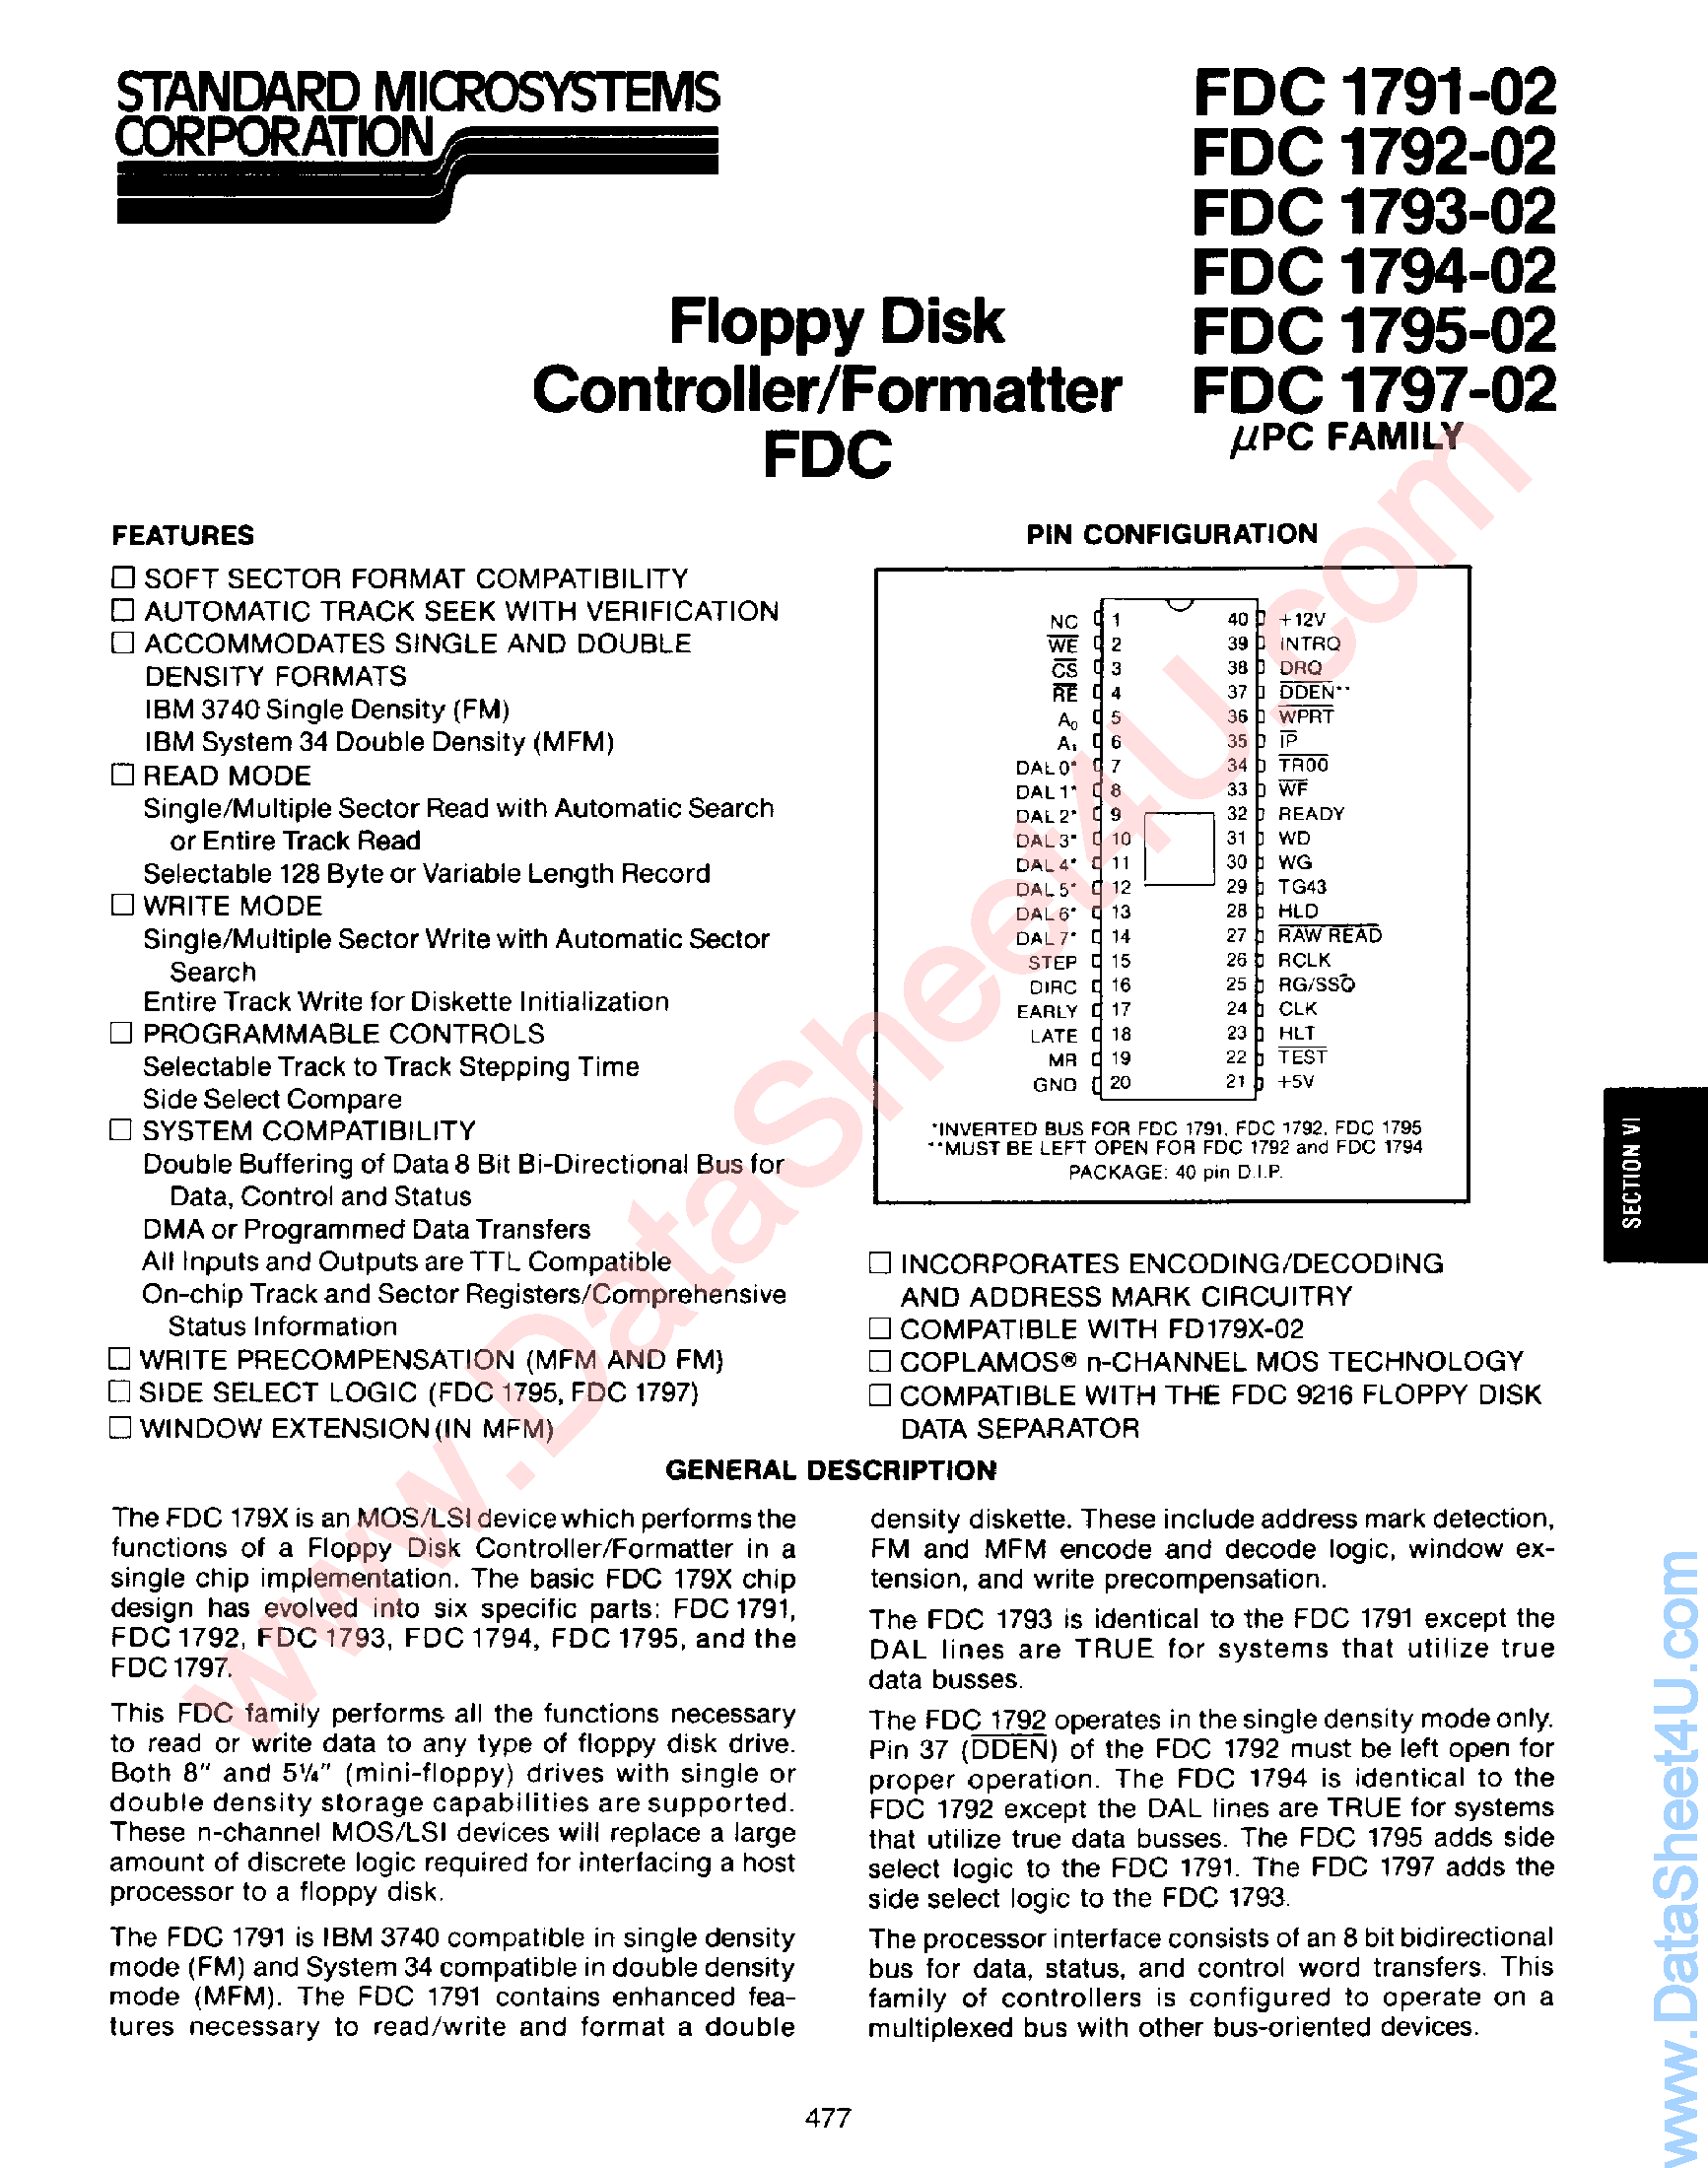 Datasheet FDC1791-02 - (FDC179x-02) Floppy Disk Controller / Formatter FDC page 1